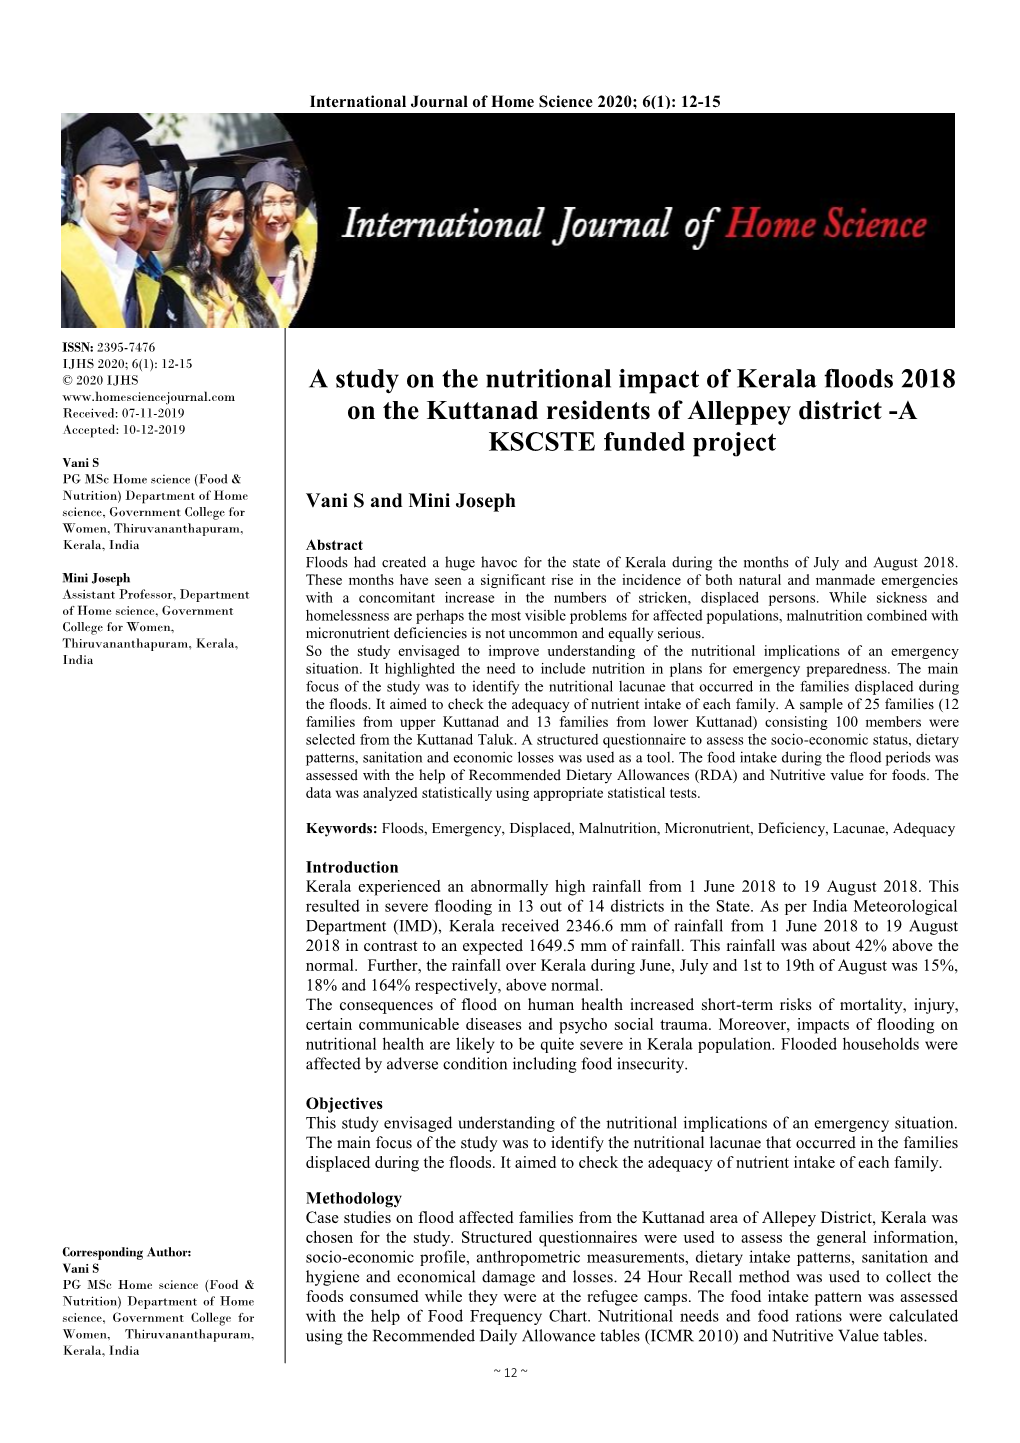 A Study on the Nutritional Impact of Kerala Floods 2018 on the Kuttanad Residents of Alleppey District